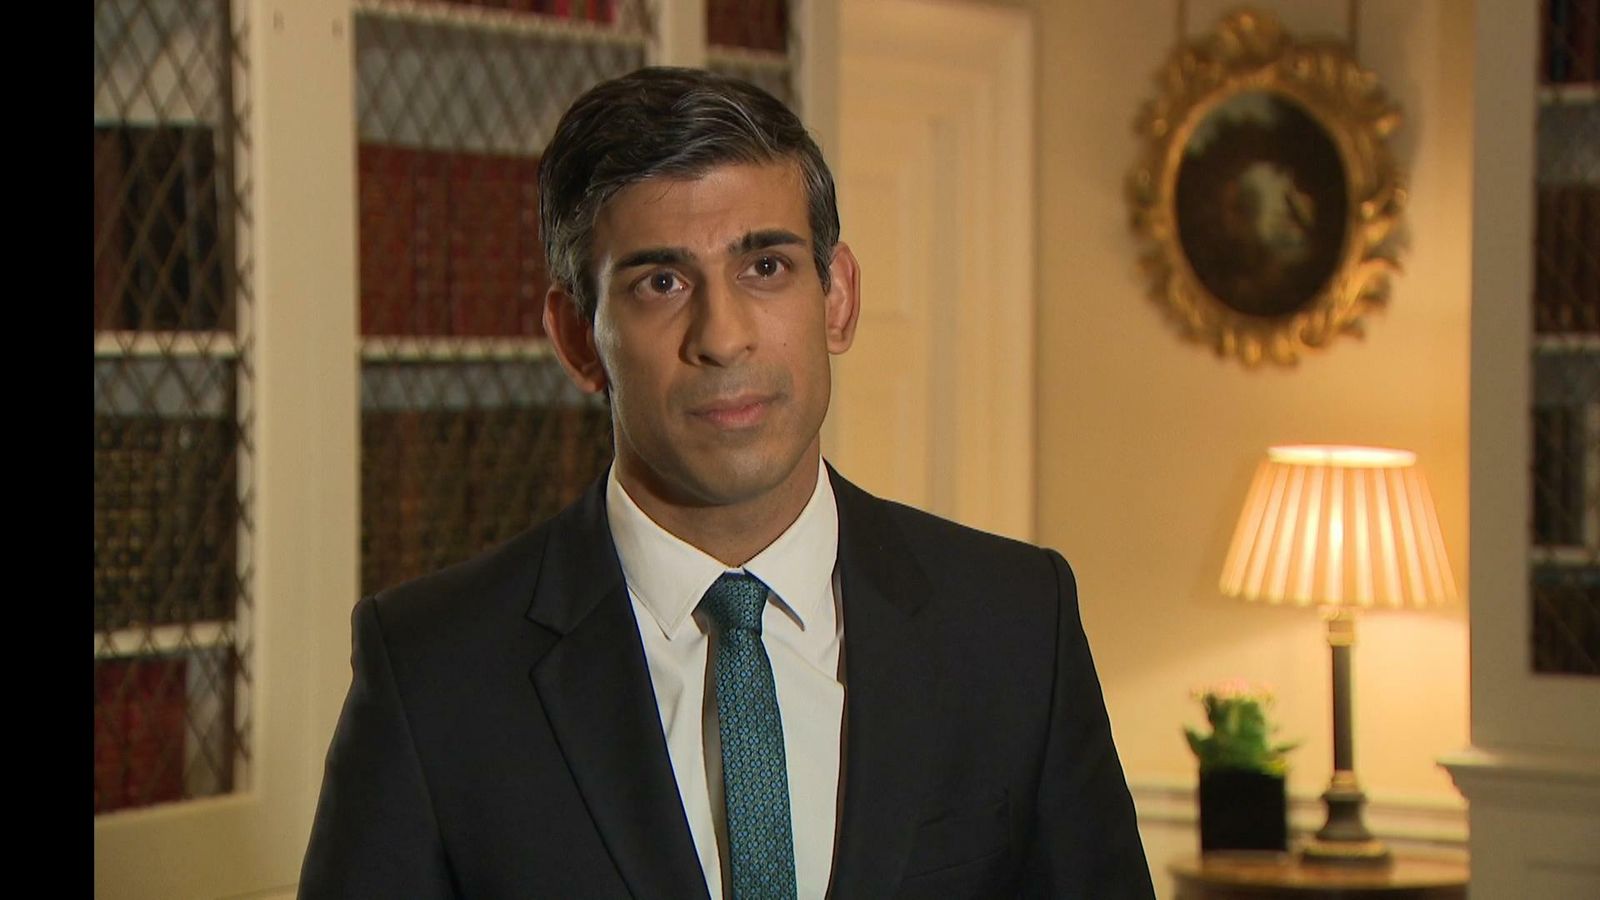 Rishi Sunak says 'racism must be confronted' after Buckingham Palace row